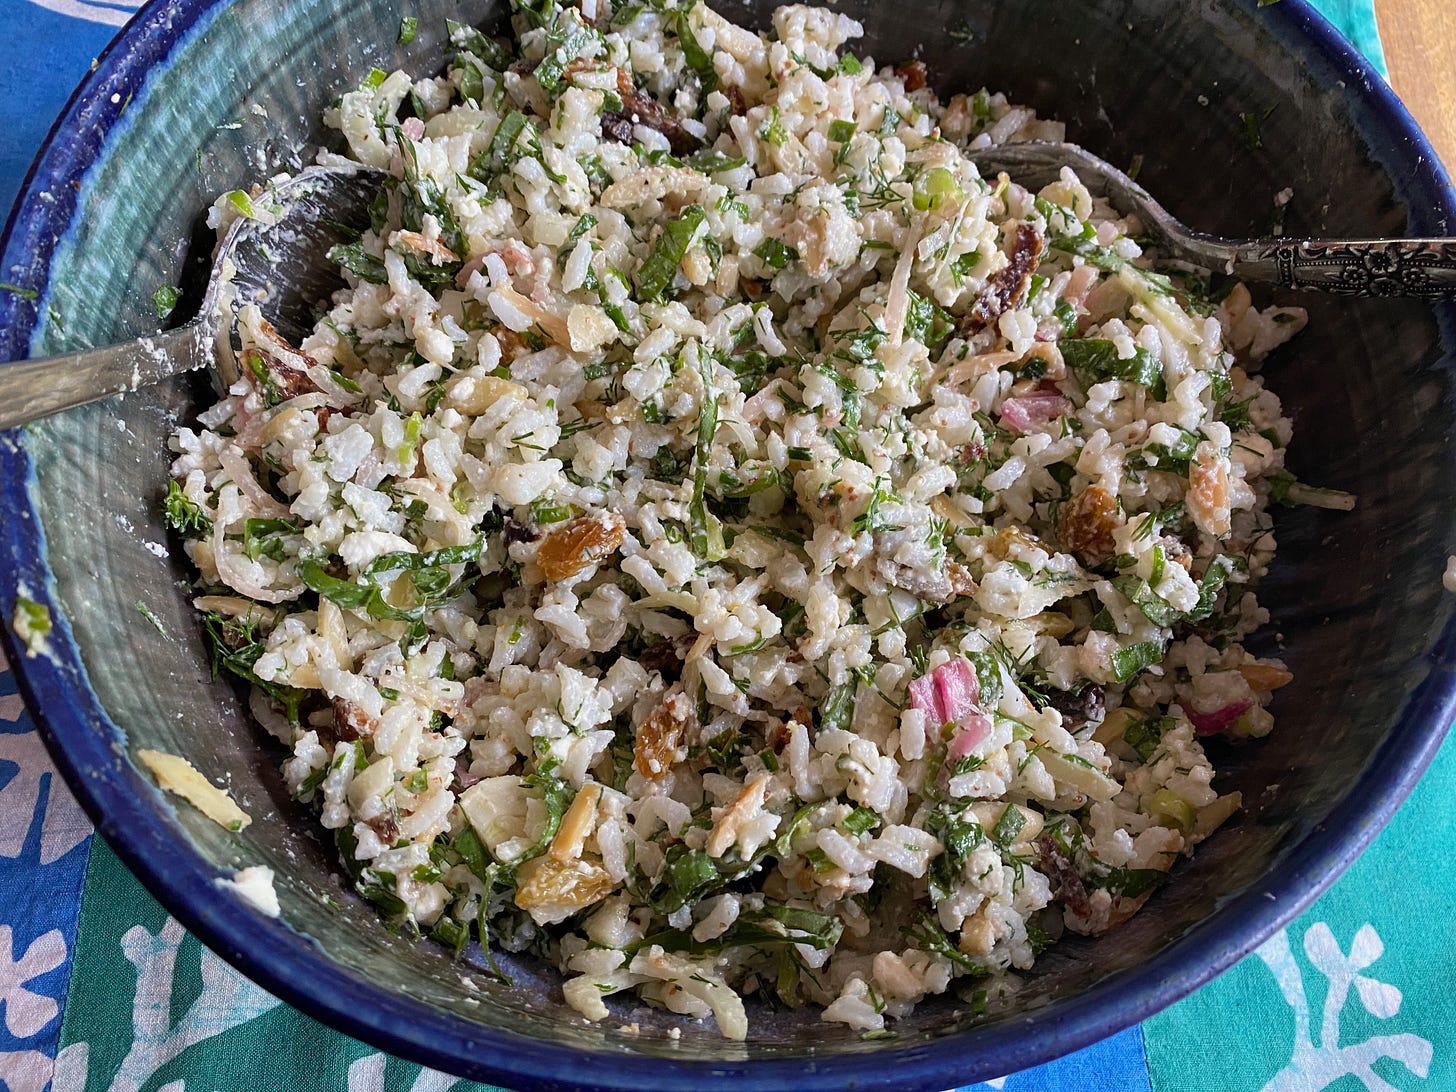 A big blue ceramic bowl full of rice salad, studded with silvered herbs and bright pink pickled shallots.